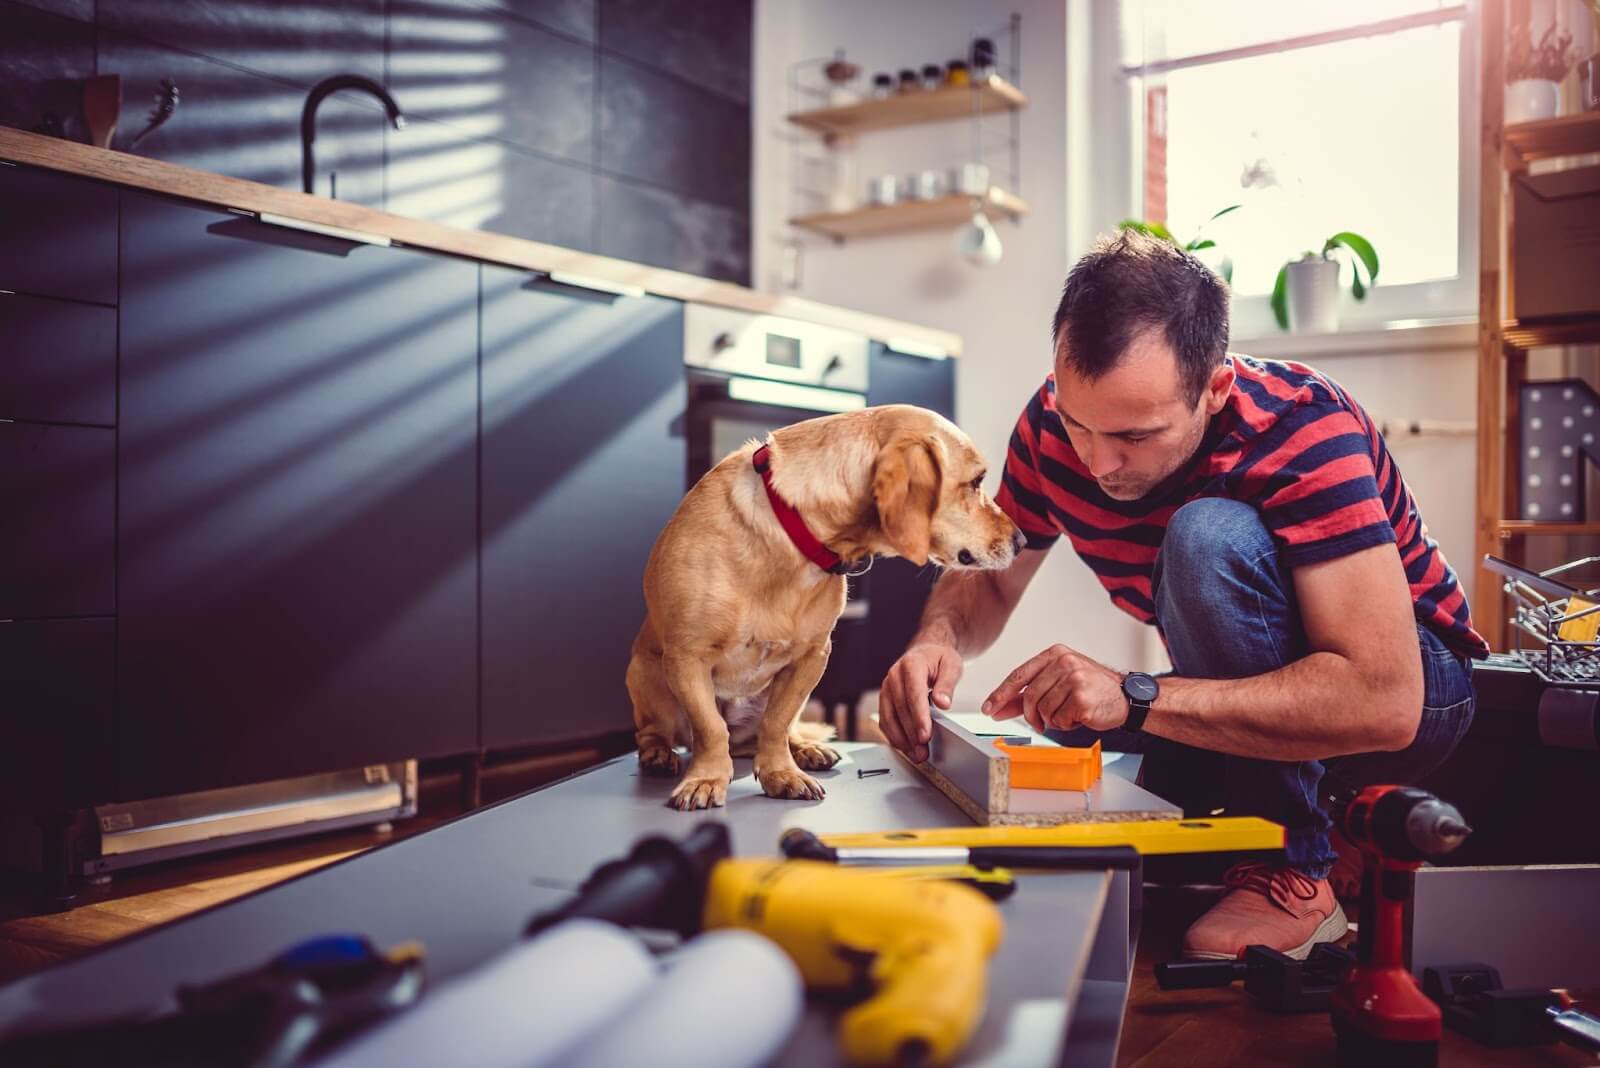 A man grooming a dog in a kitchen during cabinet installation